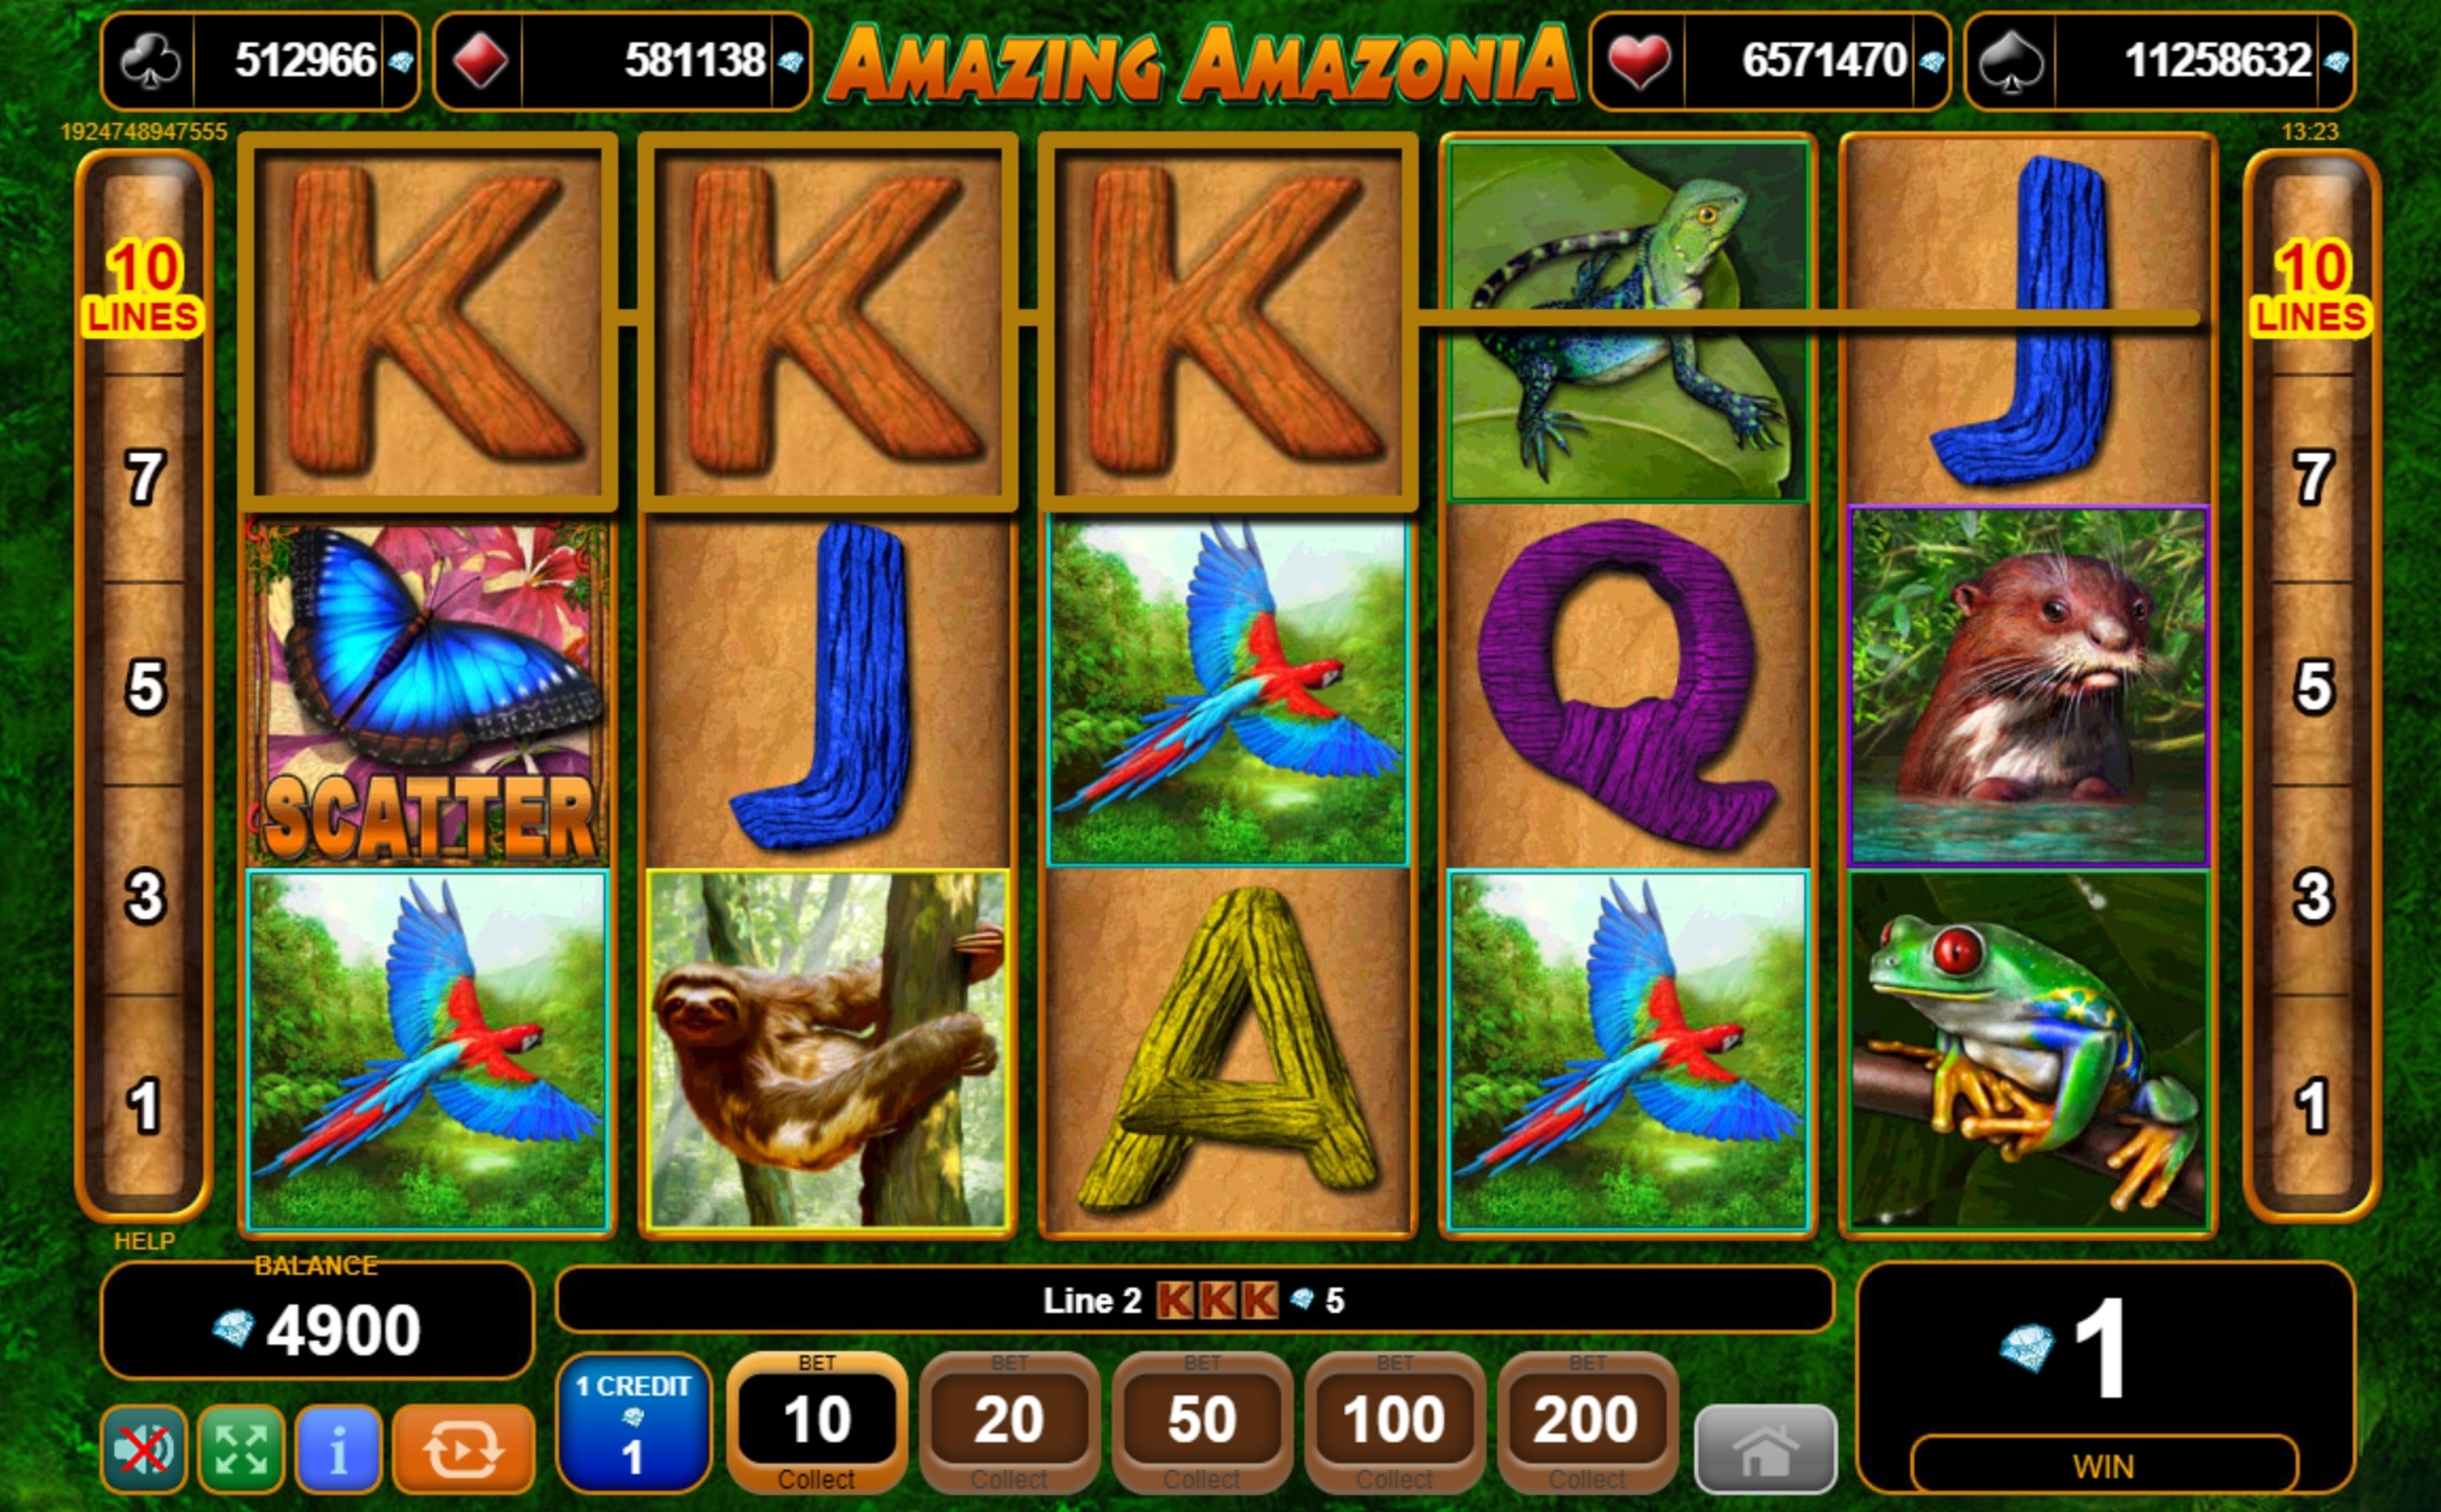 Win Money in Amazing Amazonia Free Slot Game by EGT